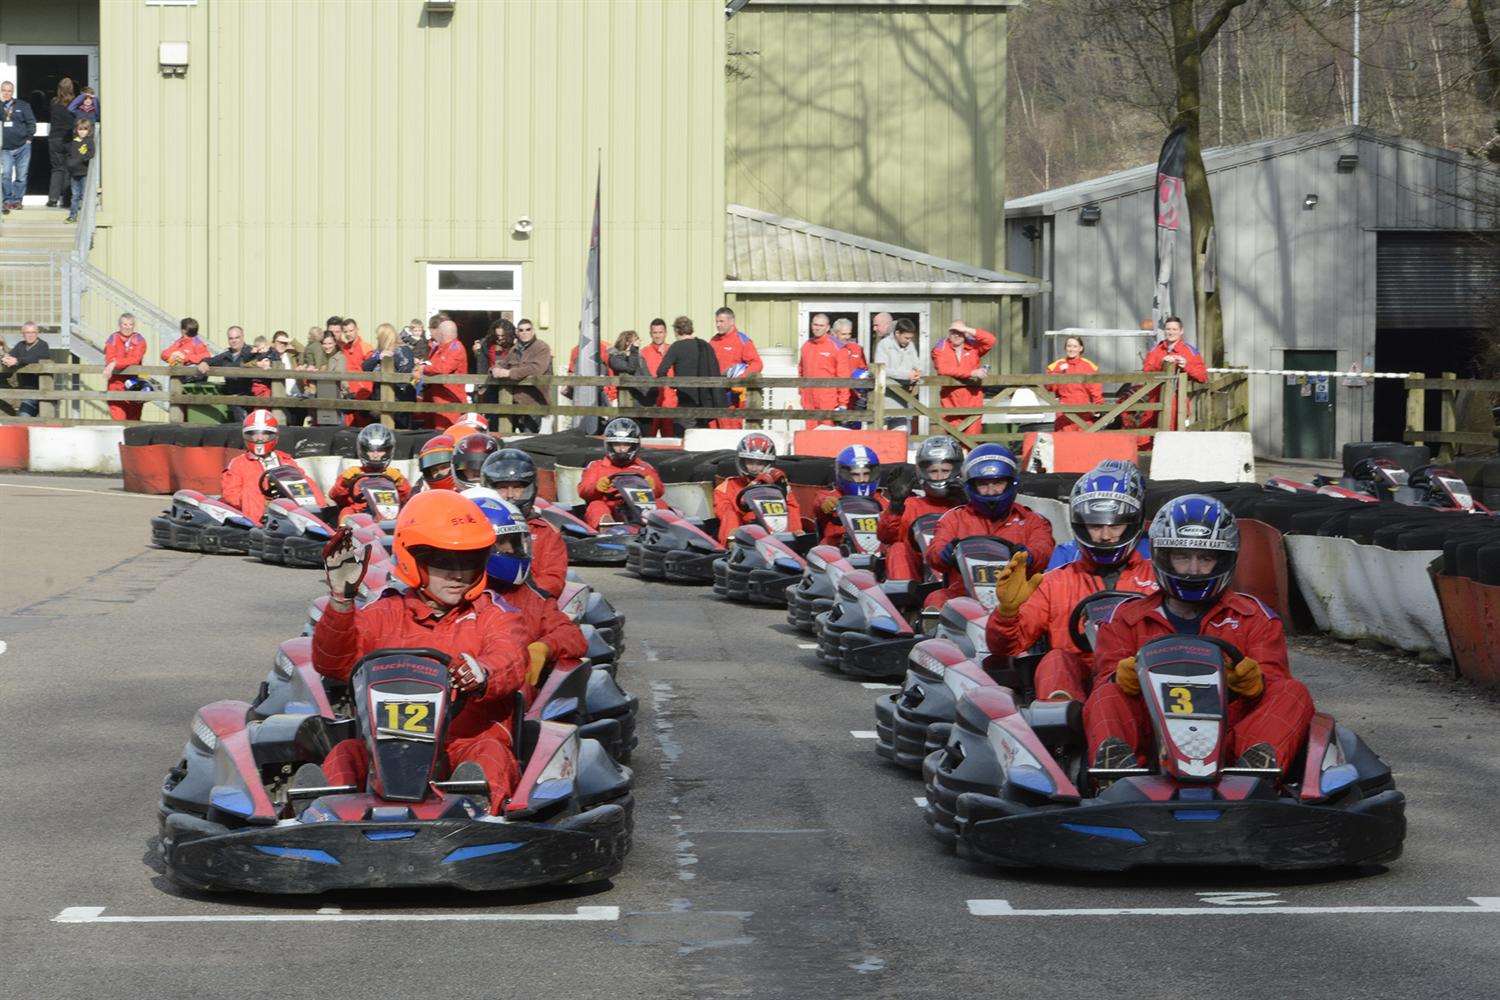 Charity karting event held at Buckmore Park in aid of Demelza House and in memory of Ryan Lawford. Picture: Simon Burchett